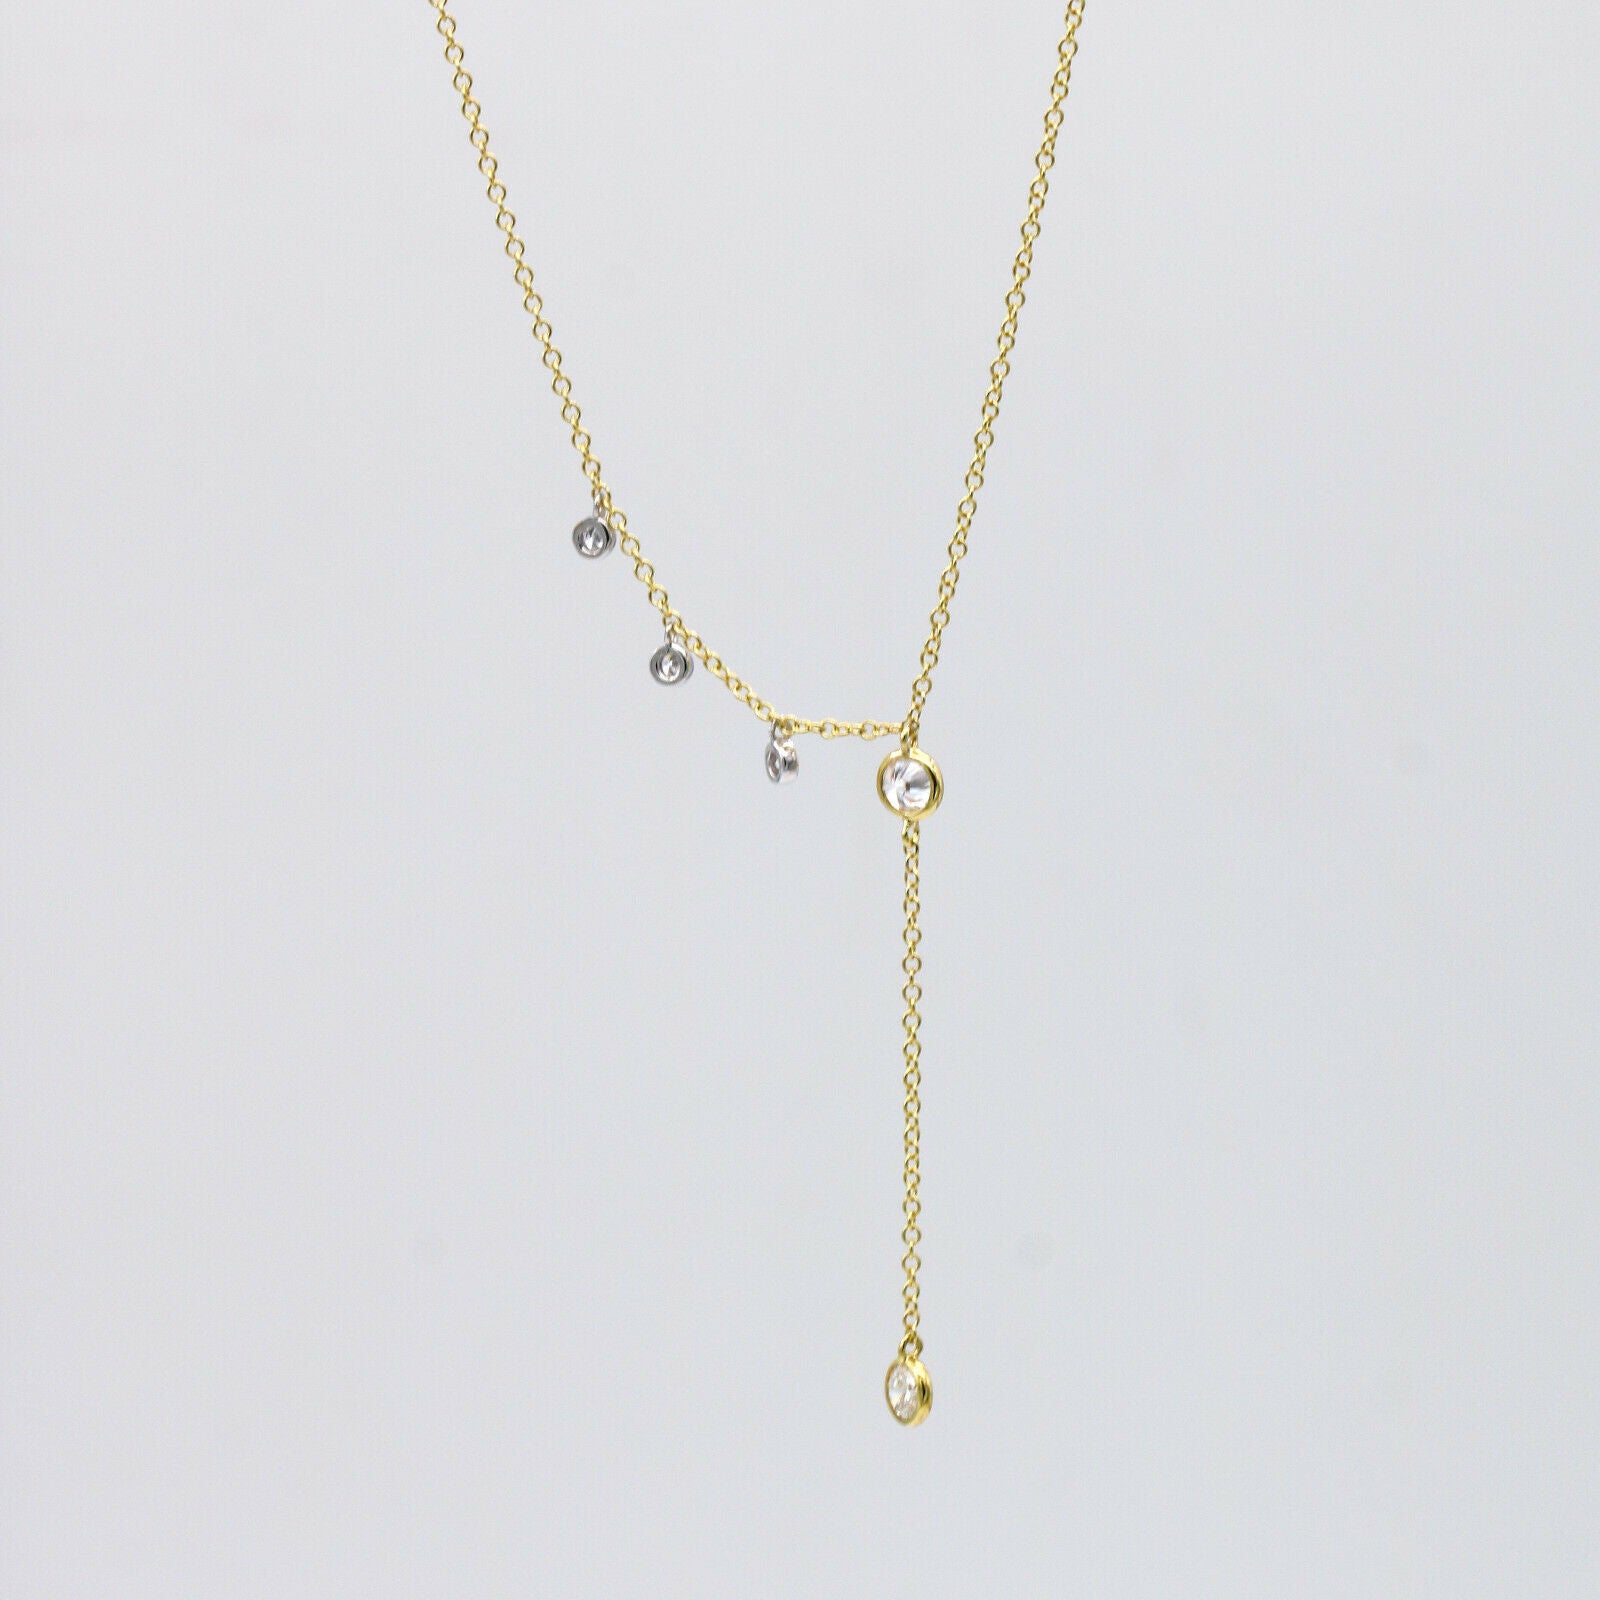 Meira T Diamond Drop Dangle Lariat Style Necklace in 14k Yellow Gold